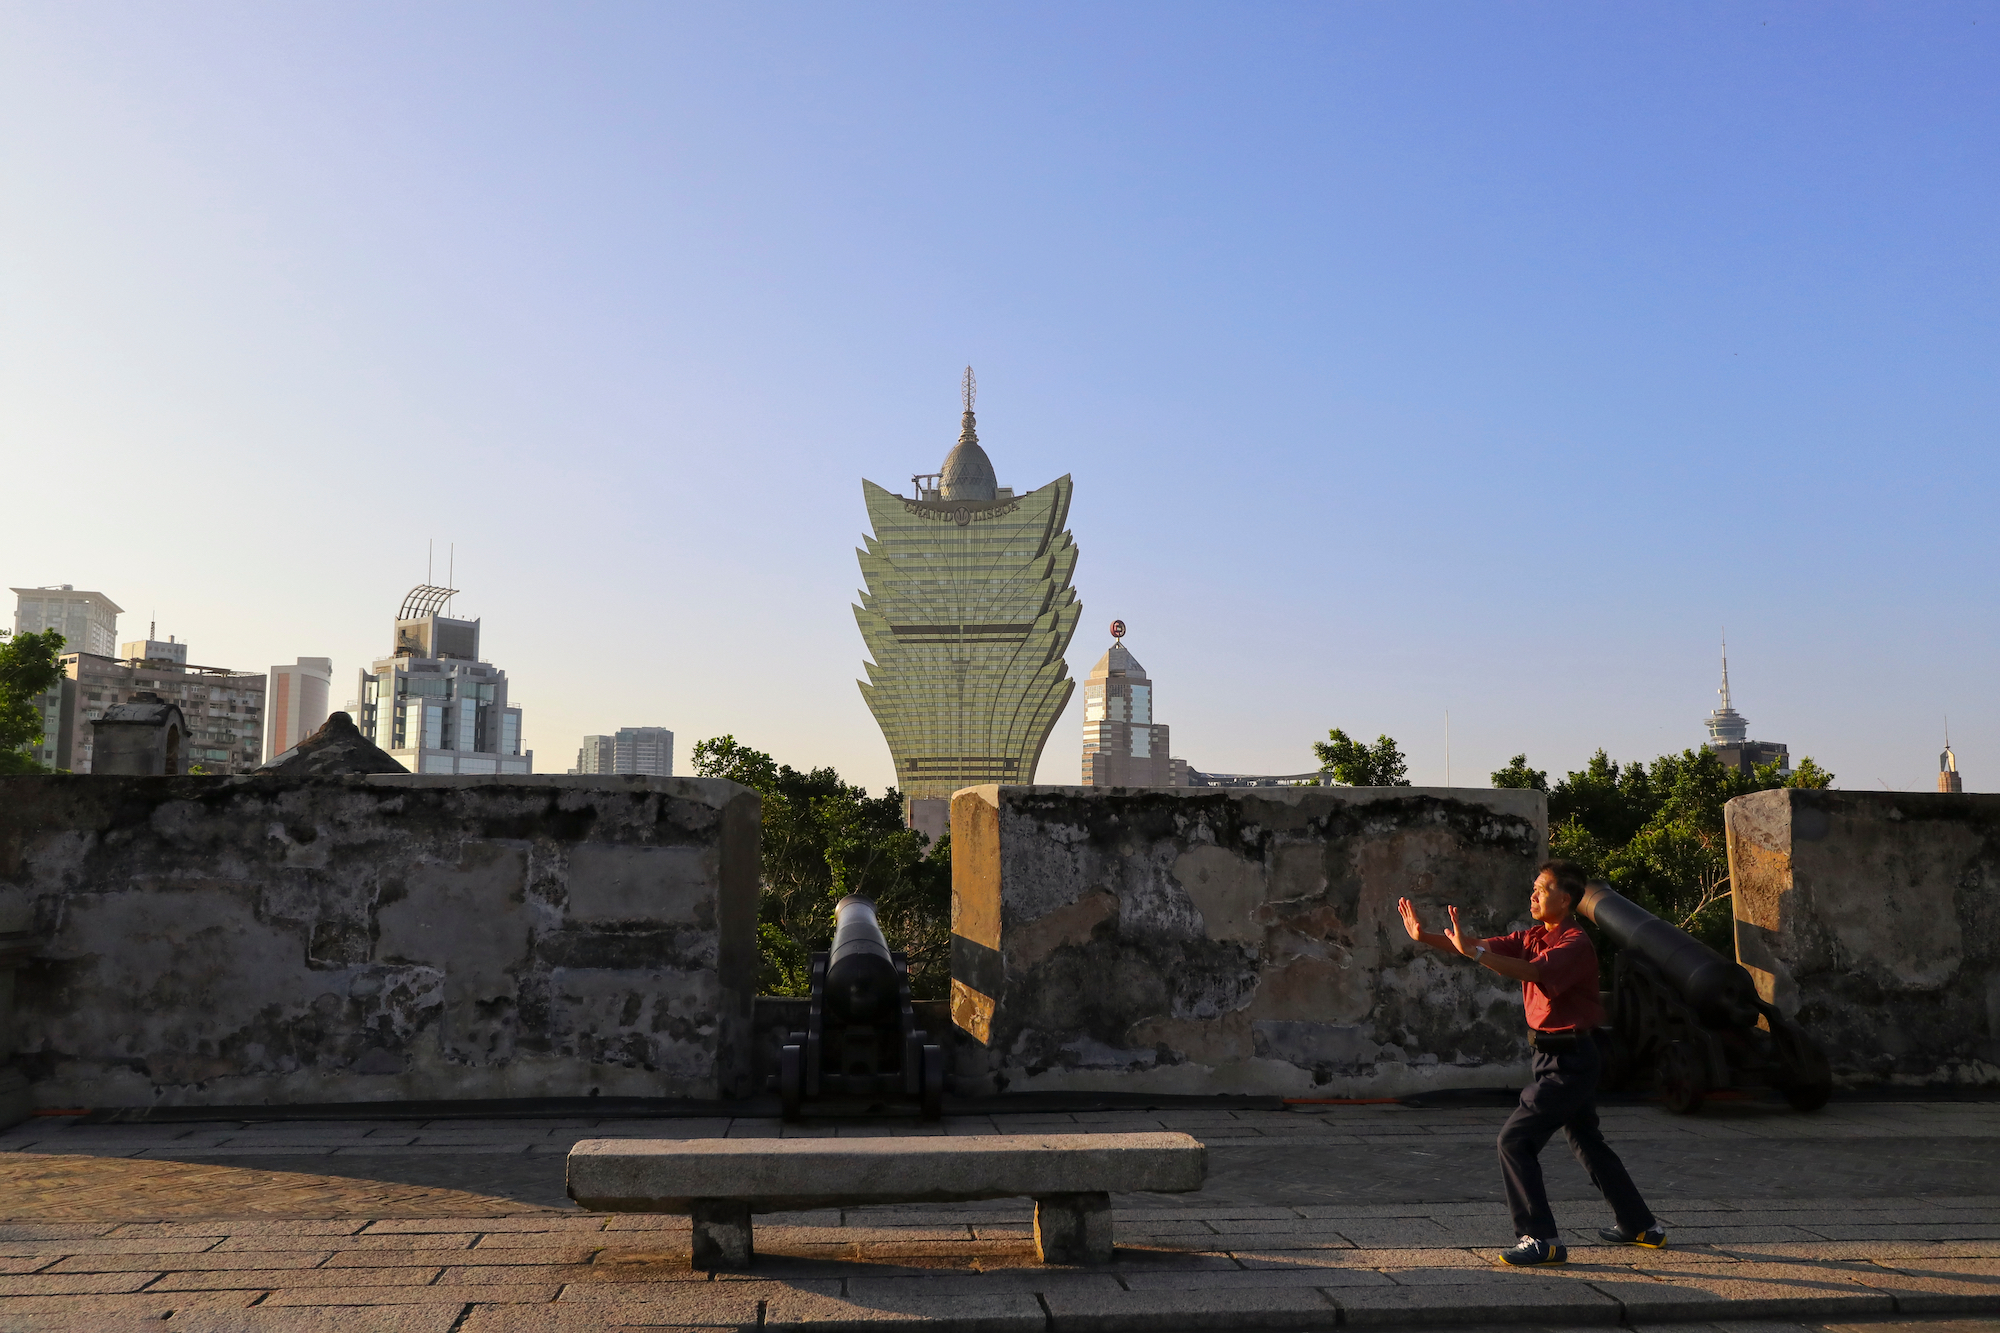 The people of Macao are getting far less exercise than they should, a new survey shows